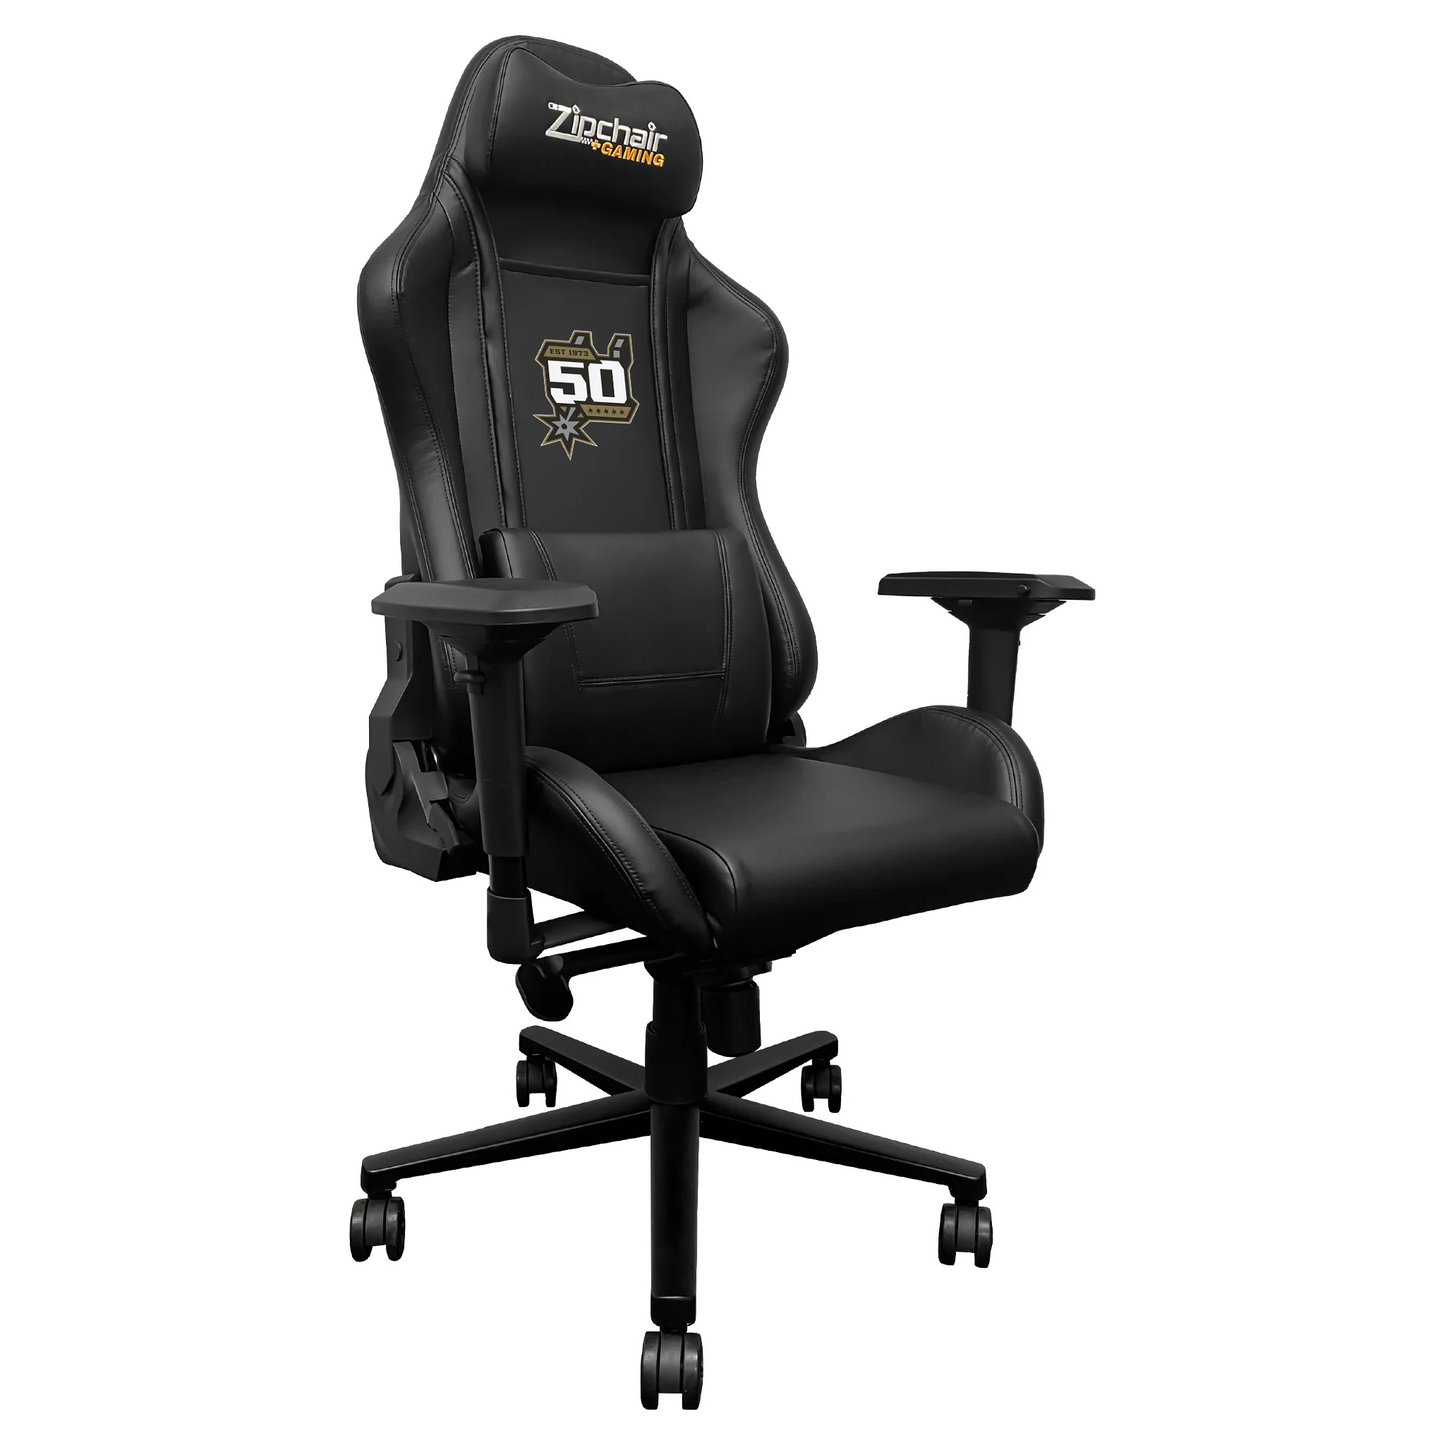 SAN ANTONIO SPURS XPRESSION PRO GAMING CHAIR WITH TEAM COMMEMORATIVE LOGO